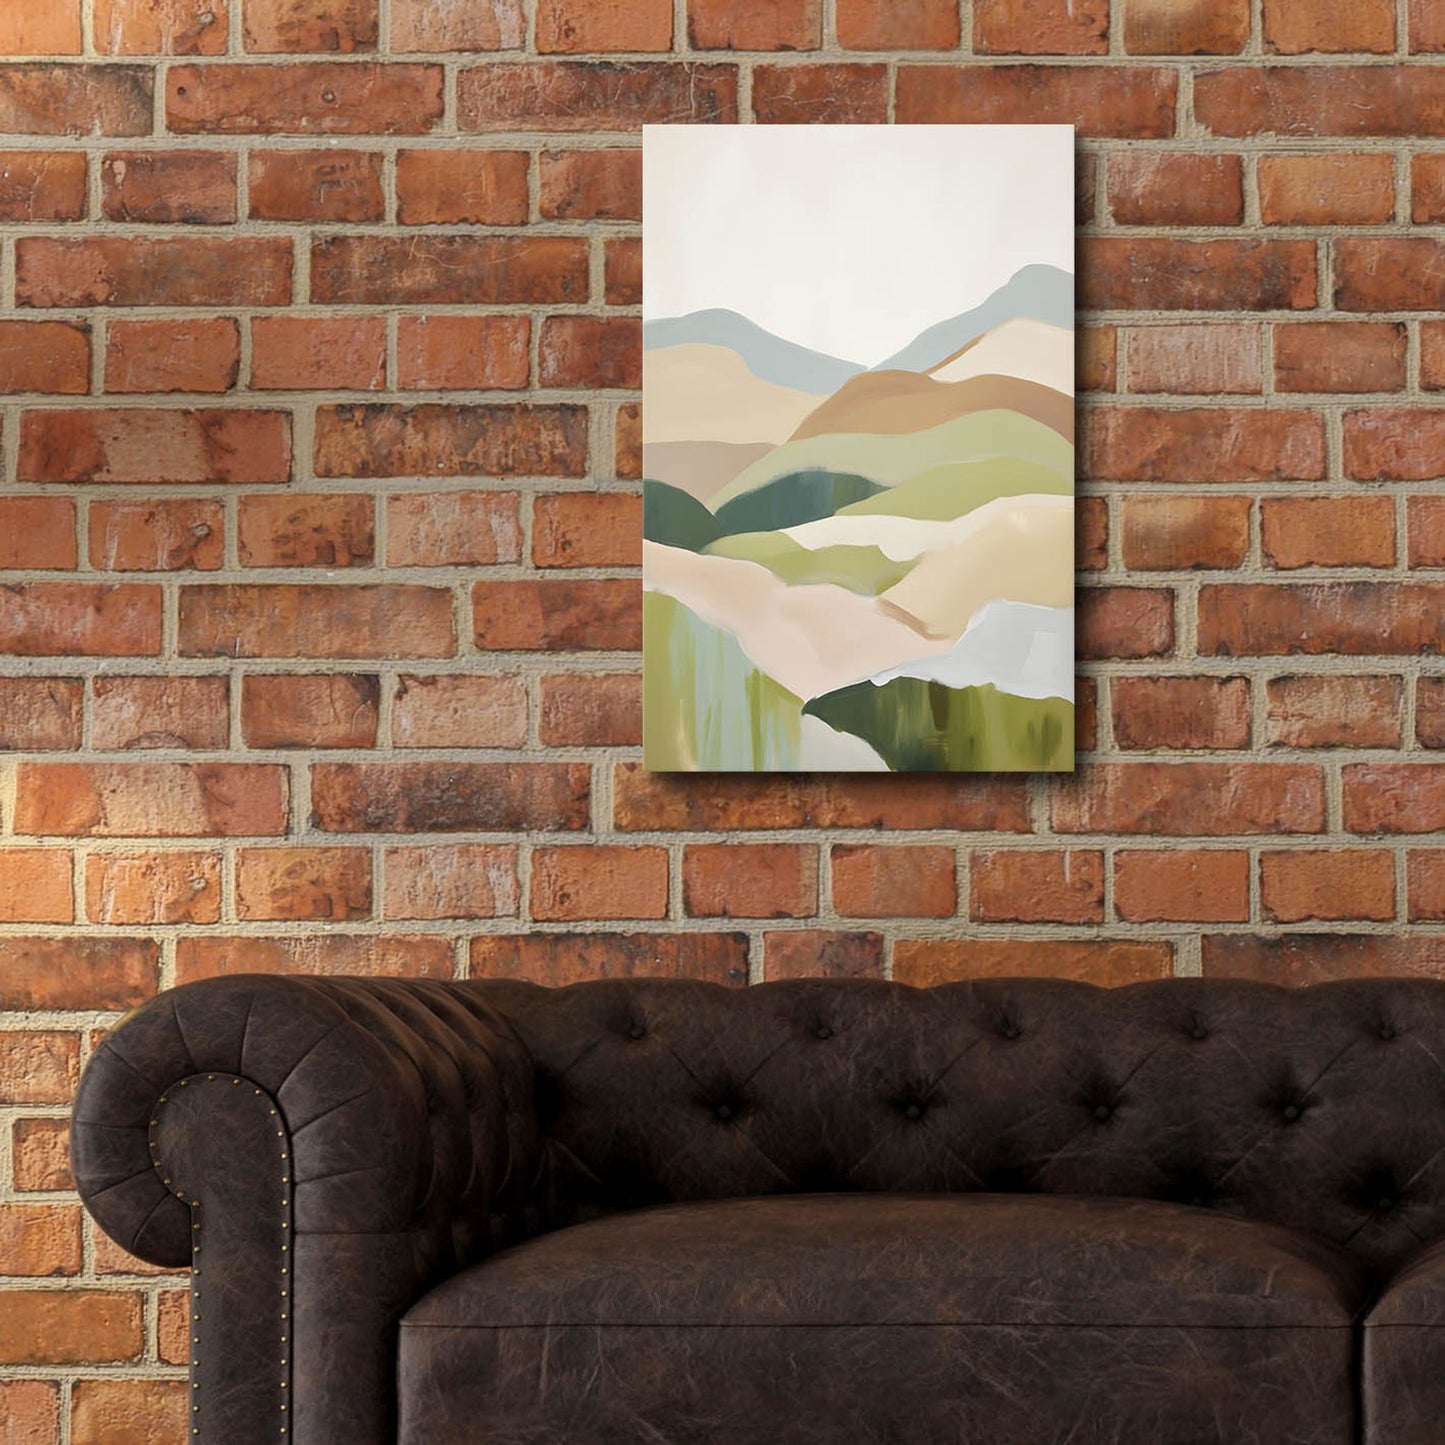 Epic Art 'Abstract Mountain 2' by Petals Prints Design, Acrylic Glass Wall Art,16x24